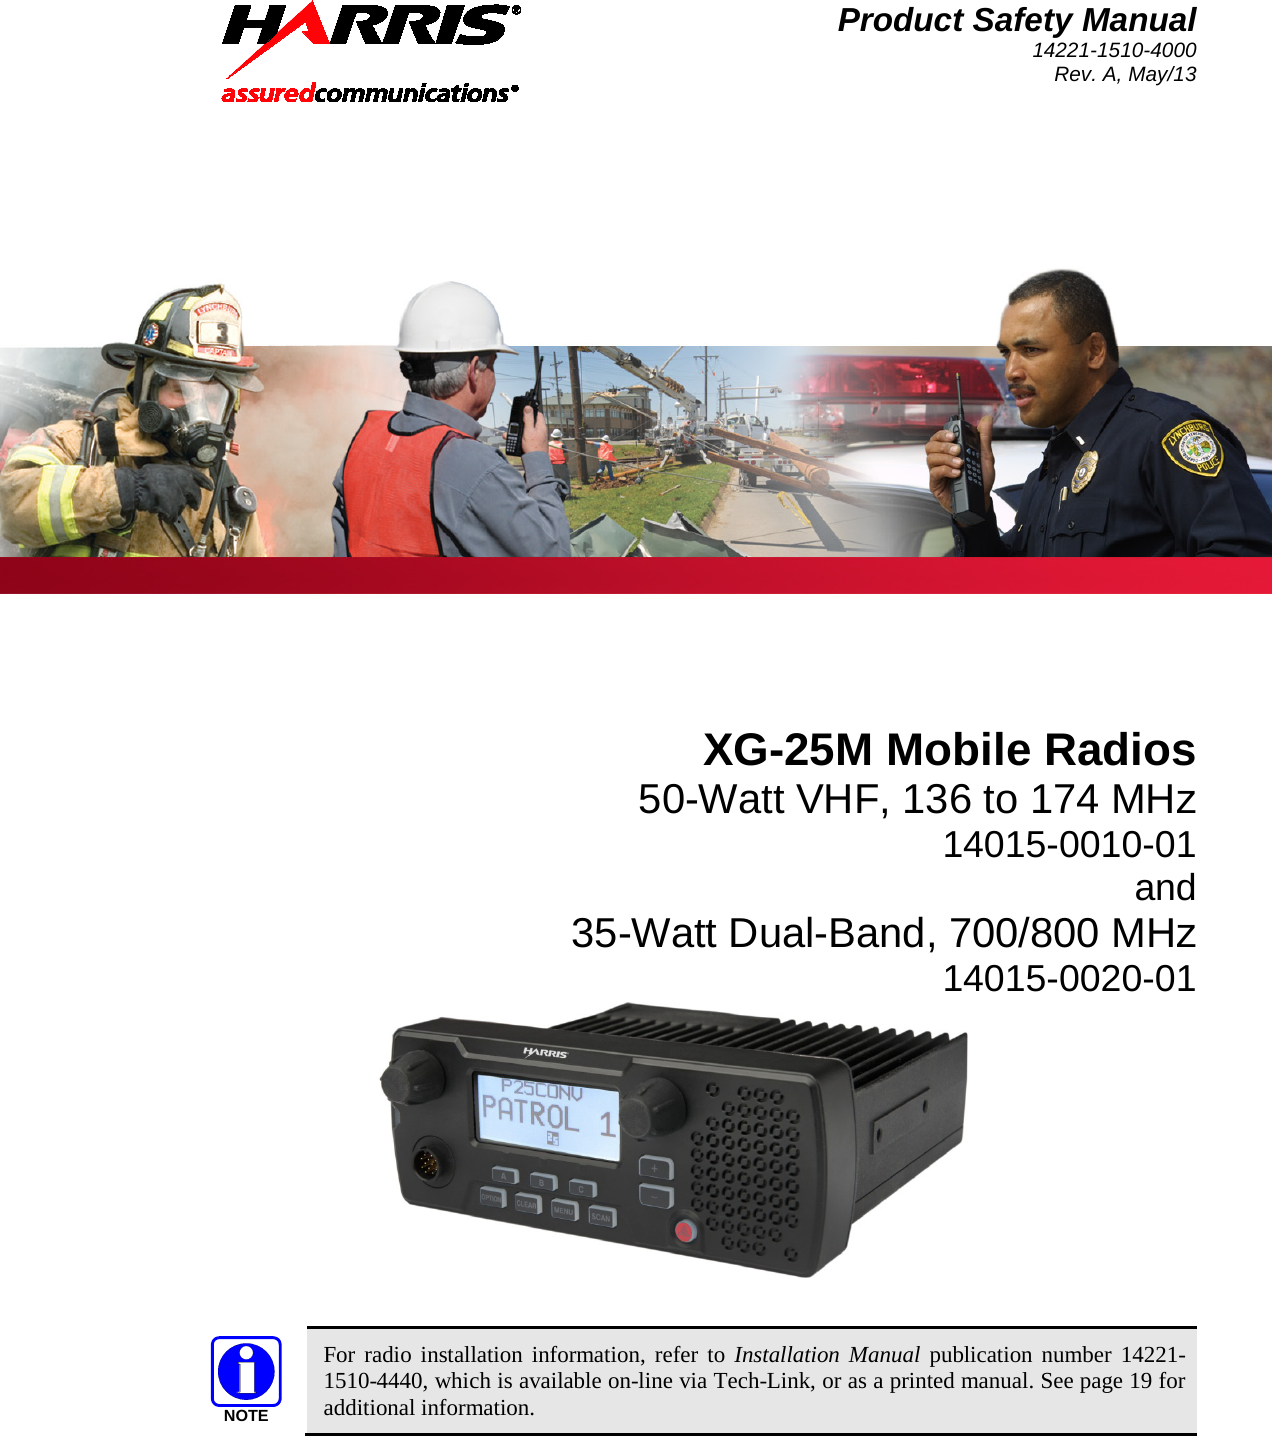 Product Safety Manual 14221-1510-4000 Rev. A, May/13   XG-25M Mobile Radios 50-Watt VHF, 136 to 174 MHz 14015-0010-01 and 35-Watt Dual-Band, 700/800 MHz 14015-0020-01                For radio installation information, refer to Installation Manual publication number 14221-1510-4440, which is available on-line via Tech-Link, or as a printed manual. See page 19 for additional information. NOTE